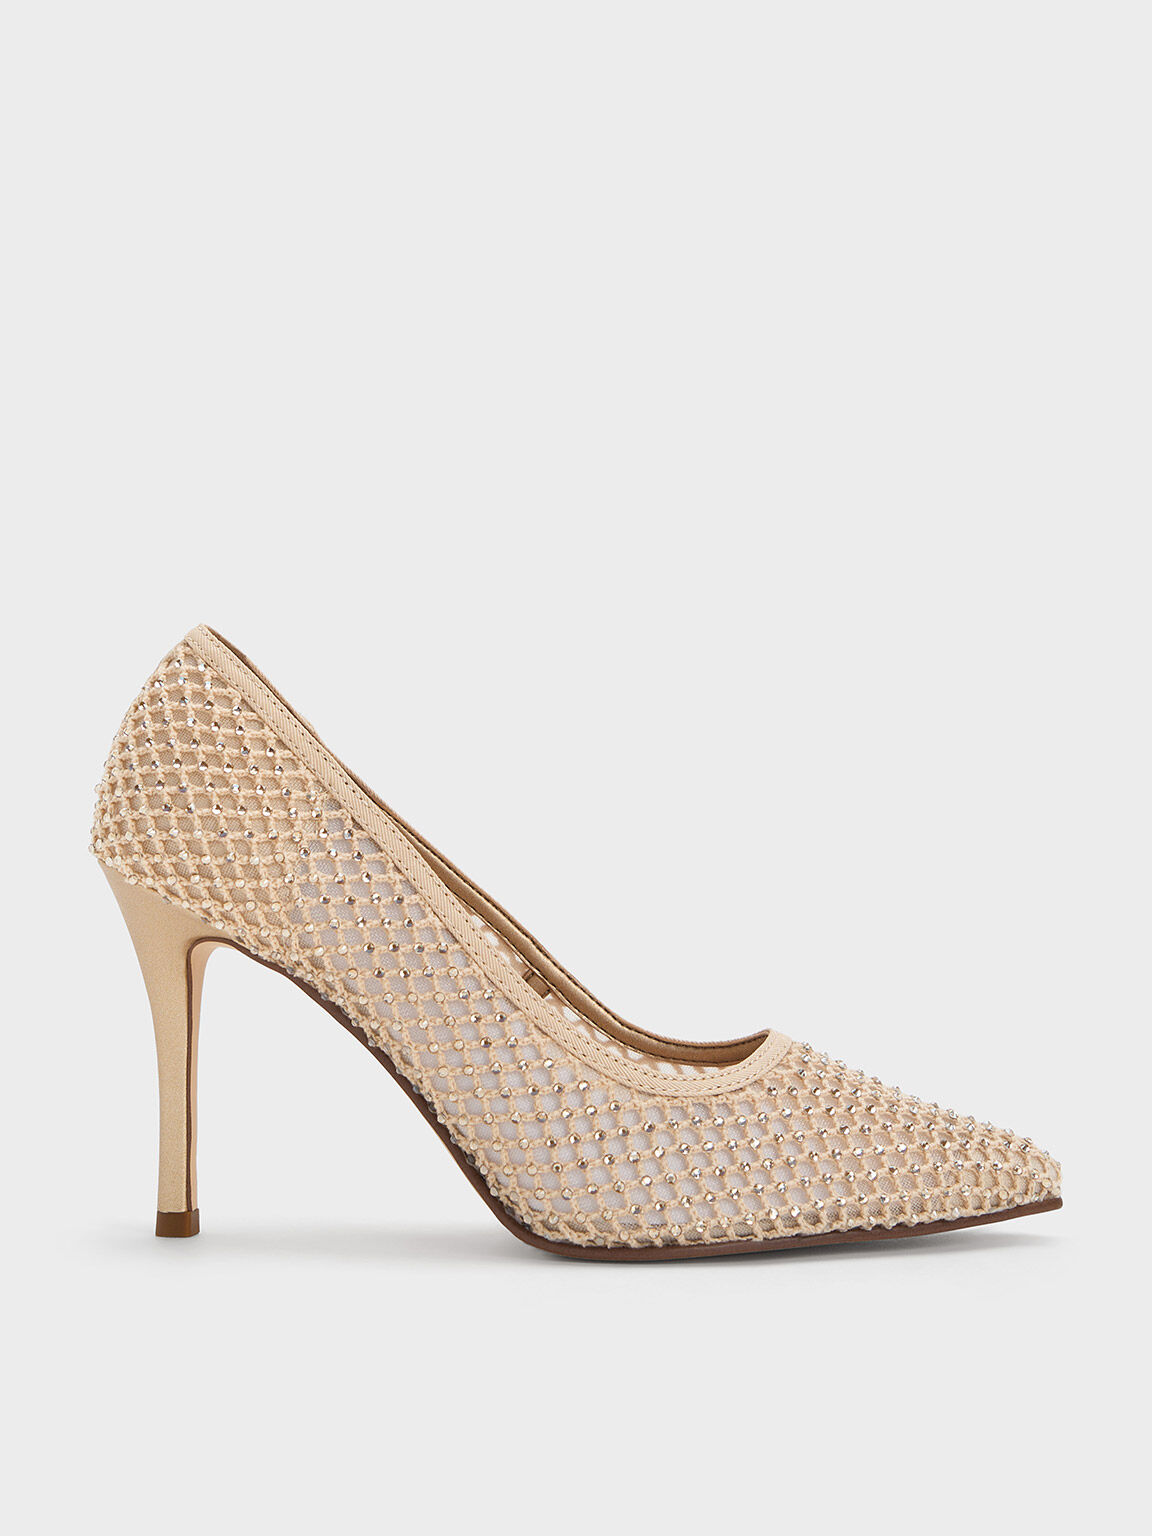 CHARLES & KEITH Rose Gold Criss Cross Platform Heels | Fashion shoes  sandals, Charles and keith shoes, Heels